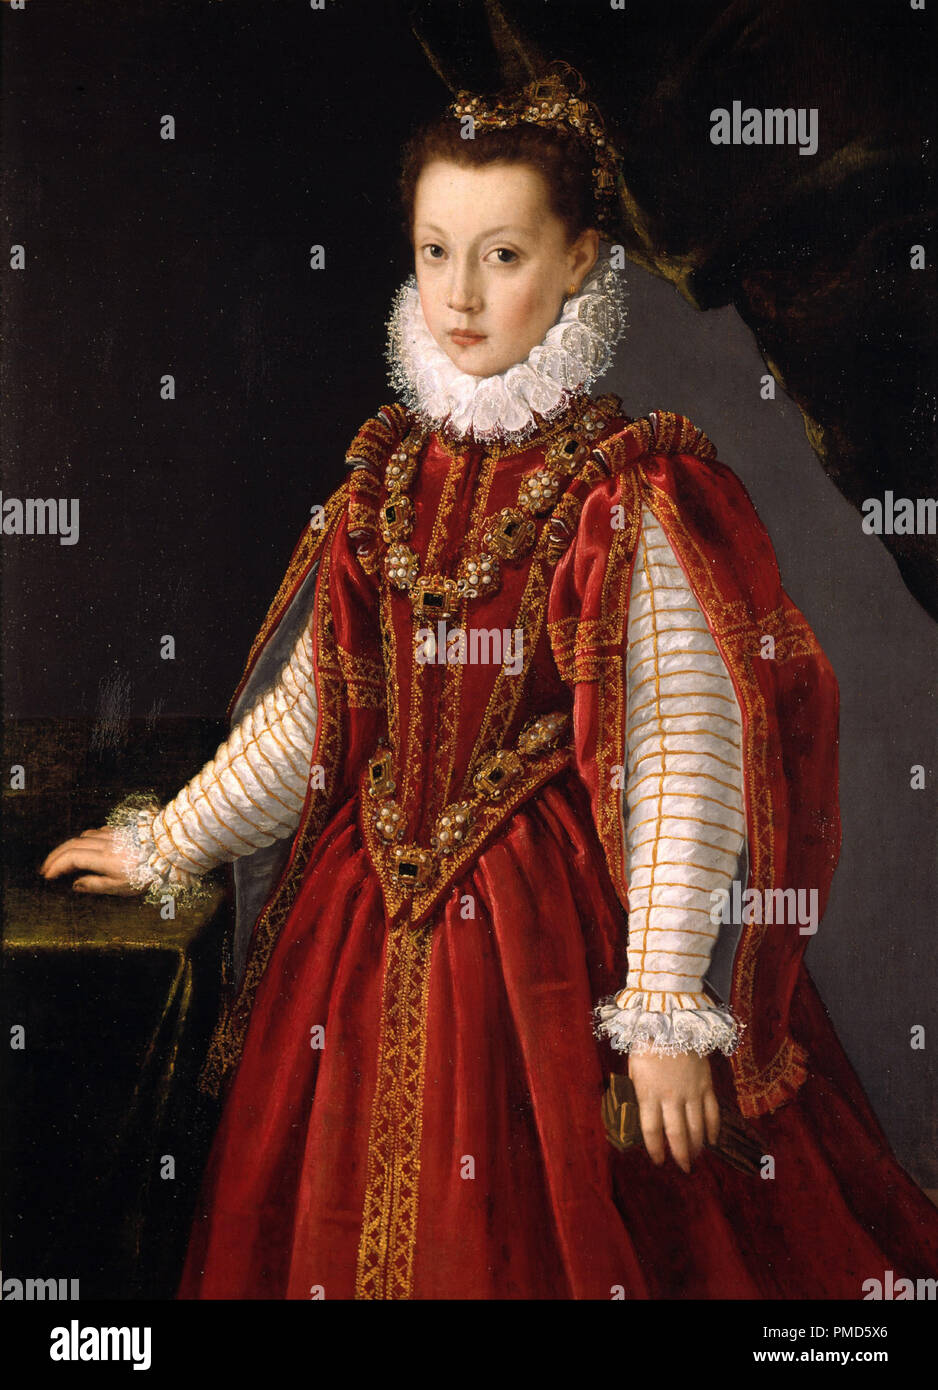 Retrato de una joven dama. Date/Period: Ca. 1580. Painting. Oil on canvas. Height: 106 cm (41.7 in); Width: 67 cm (26.3 in). Author: Sofonisba Anguissola. Anguissola, Sofonisba. Stock Photo